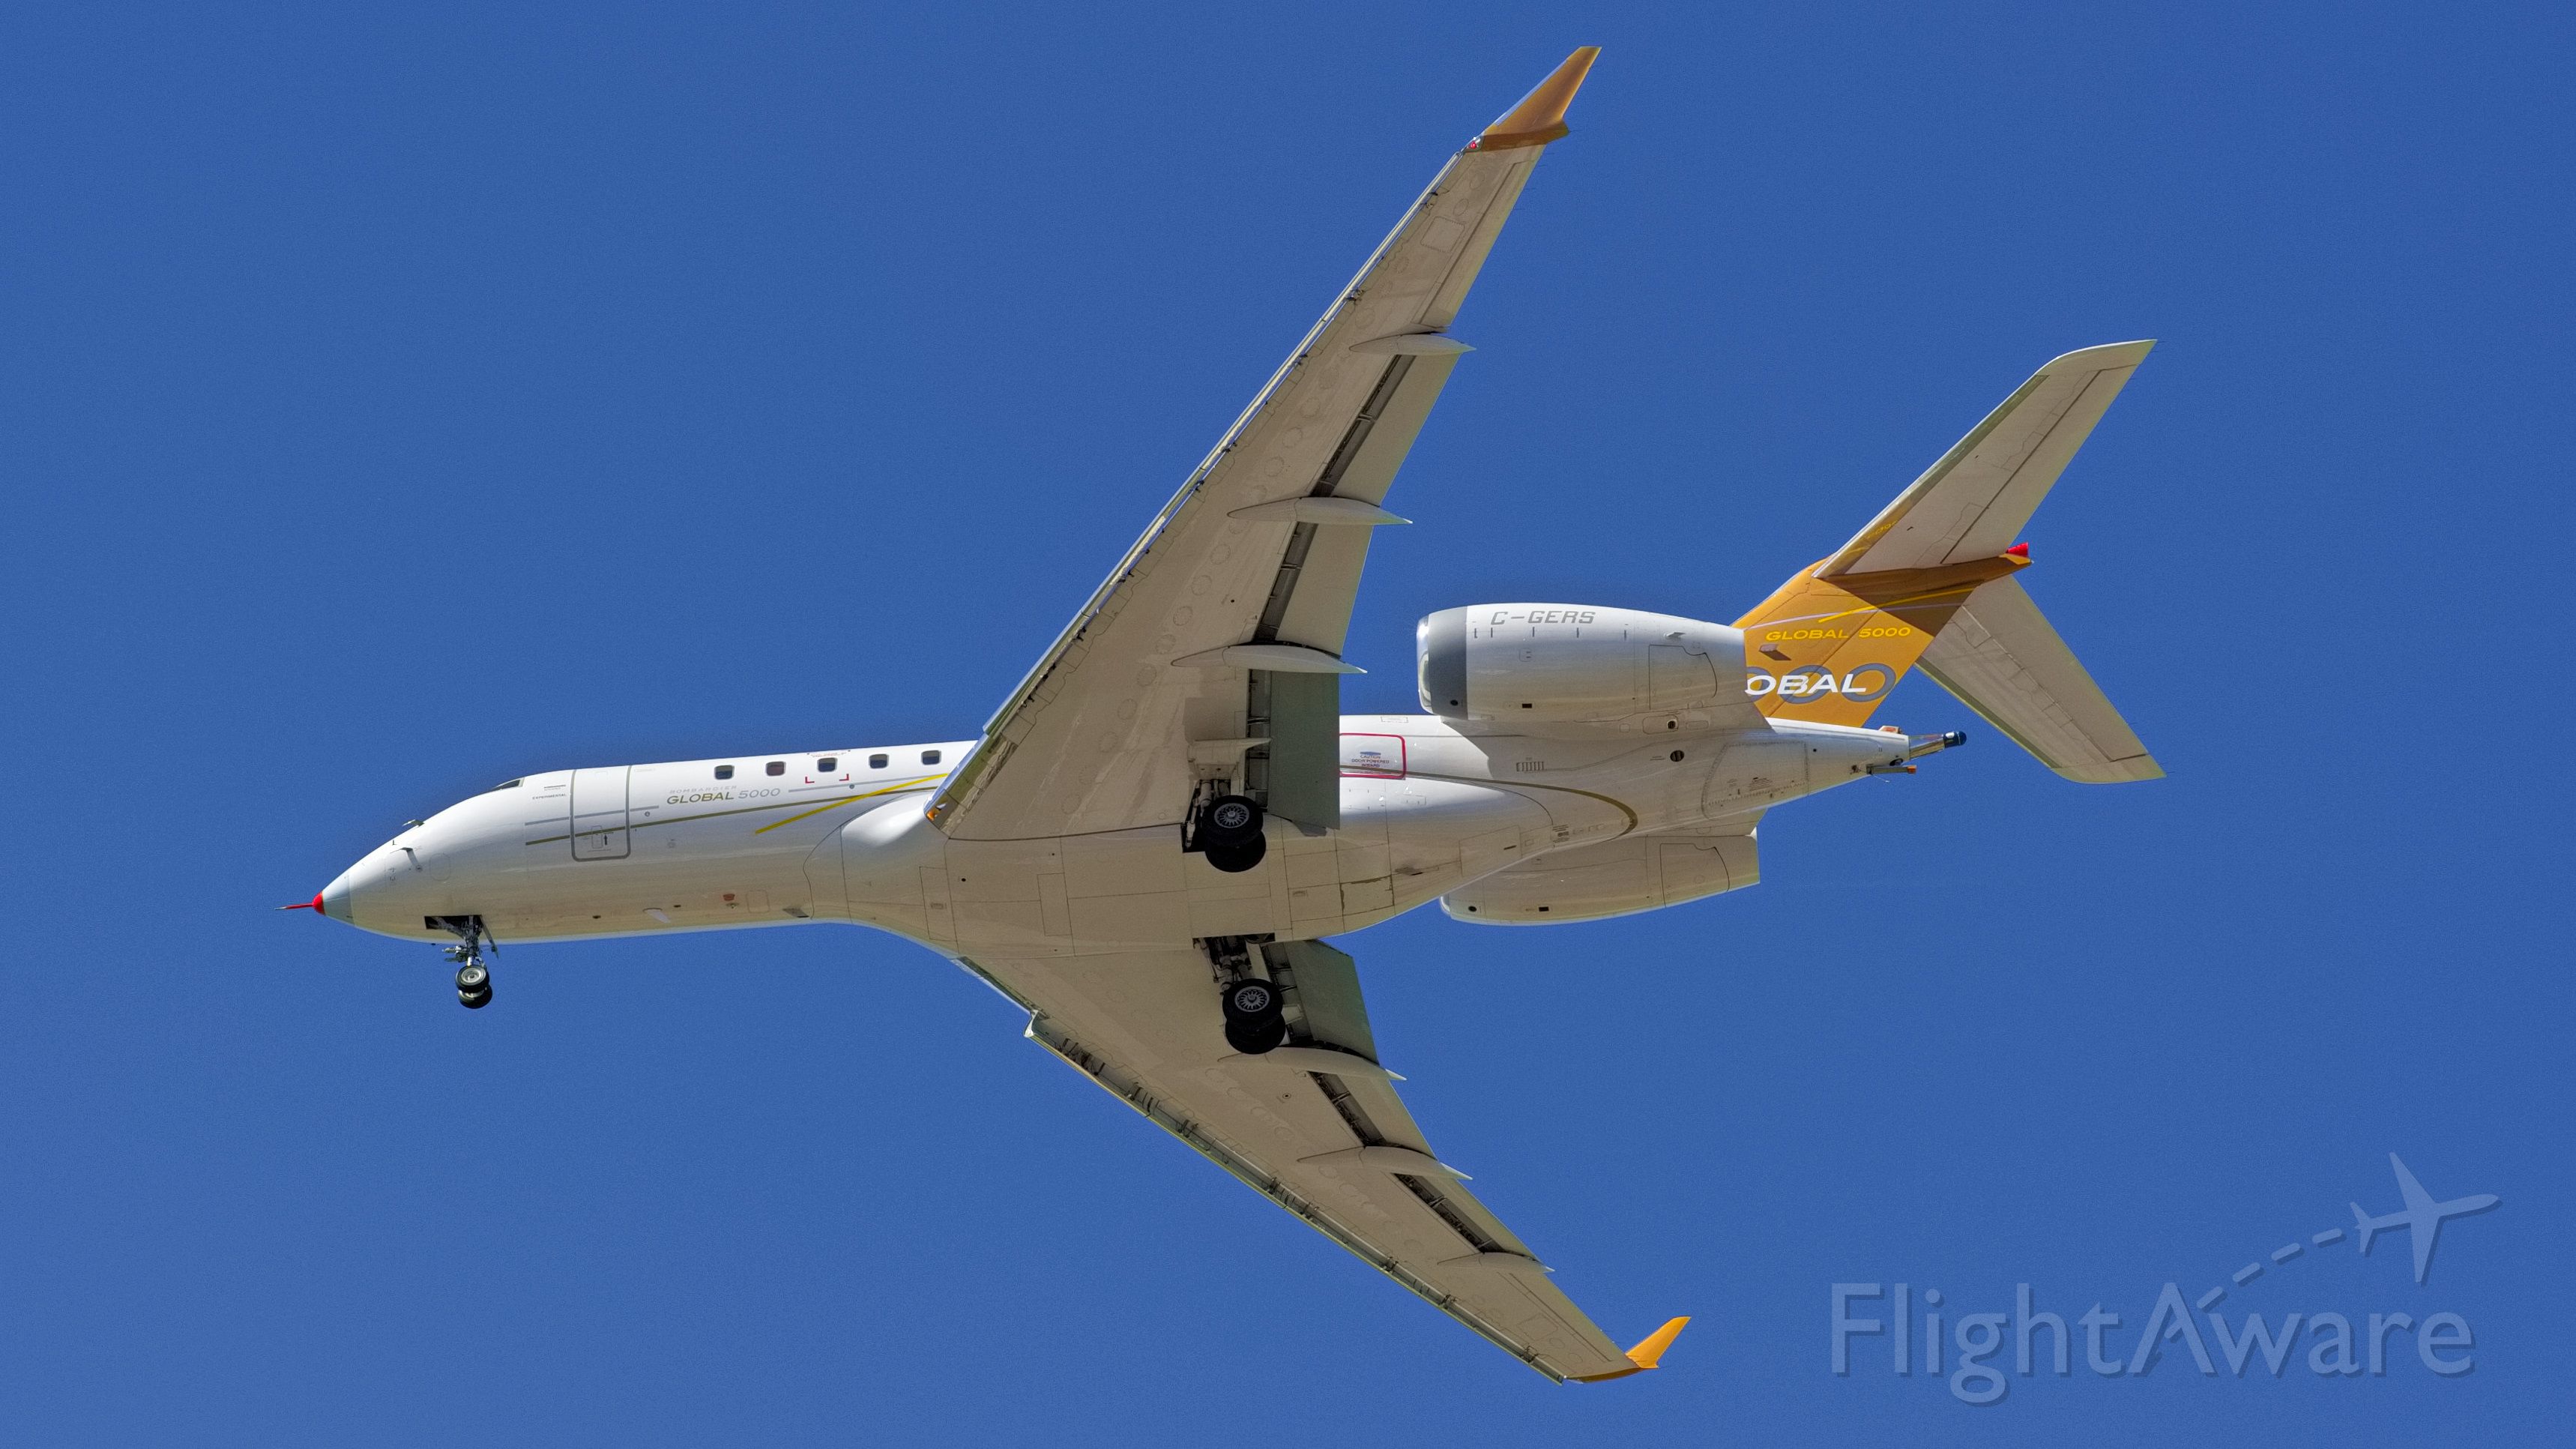 Bombardier Global 5000 (C-GERS) - A Brand new Bombardier Global 5000 landing at Wichita after a test flight.